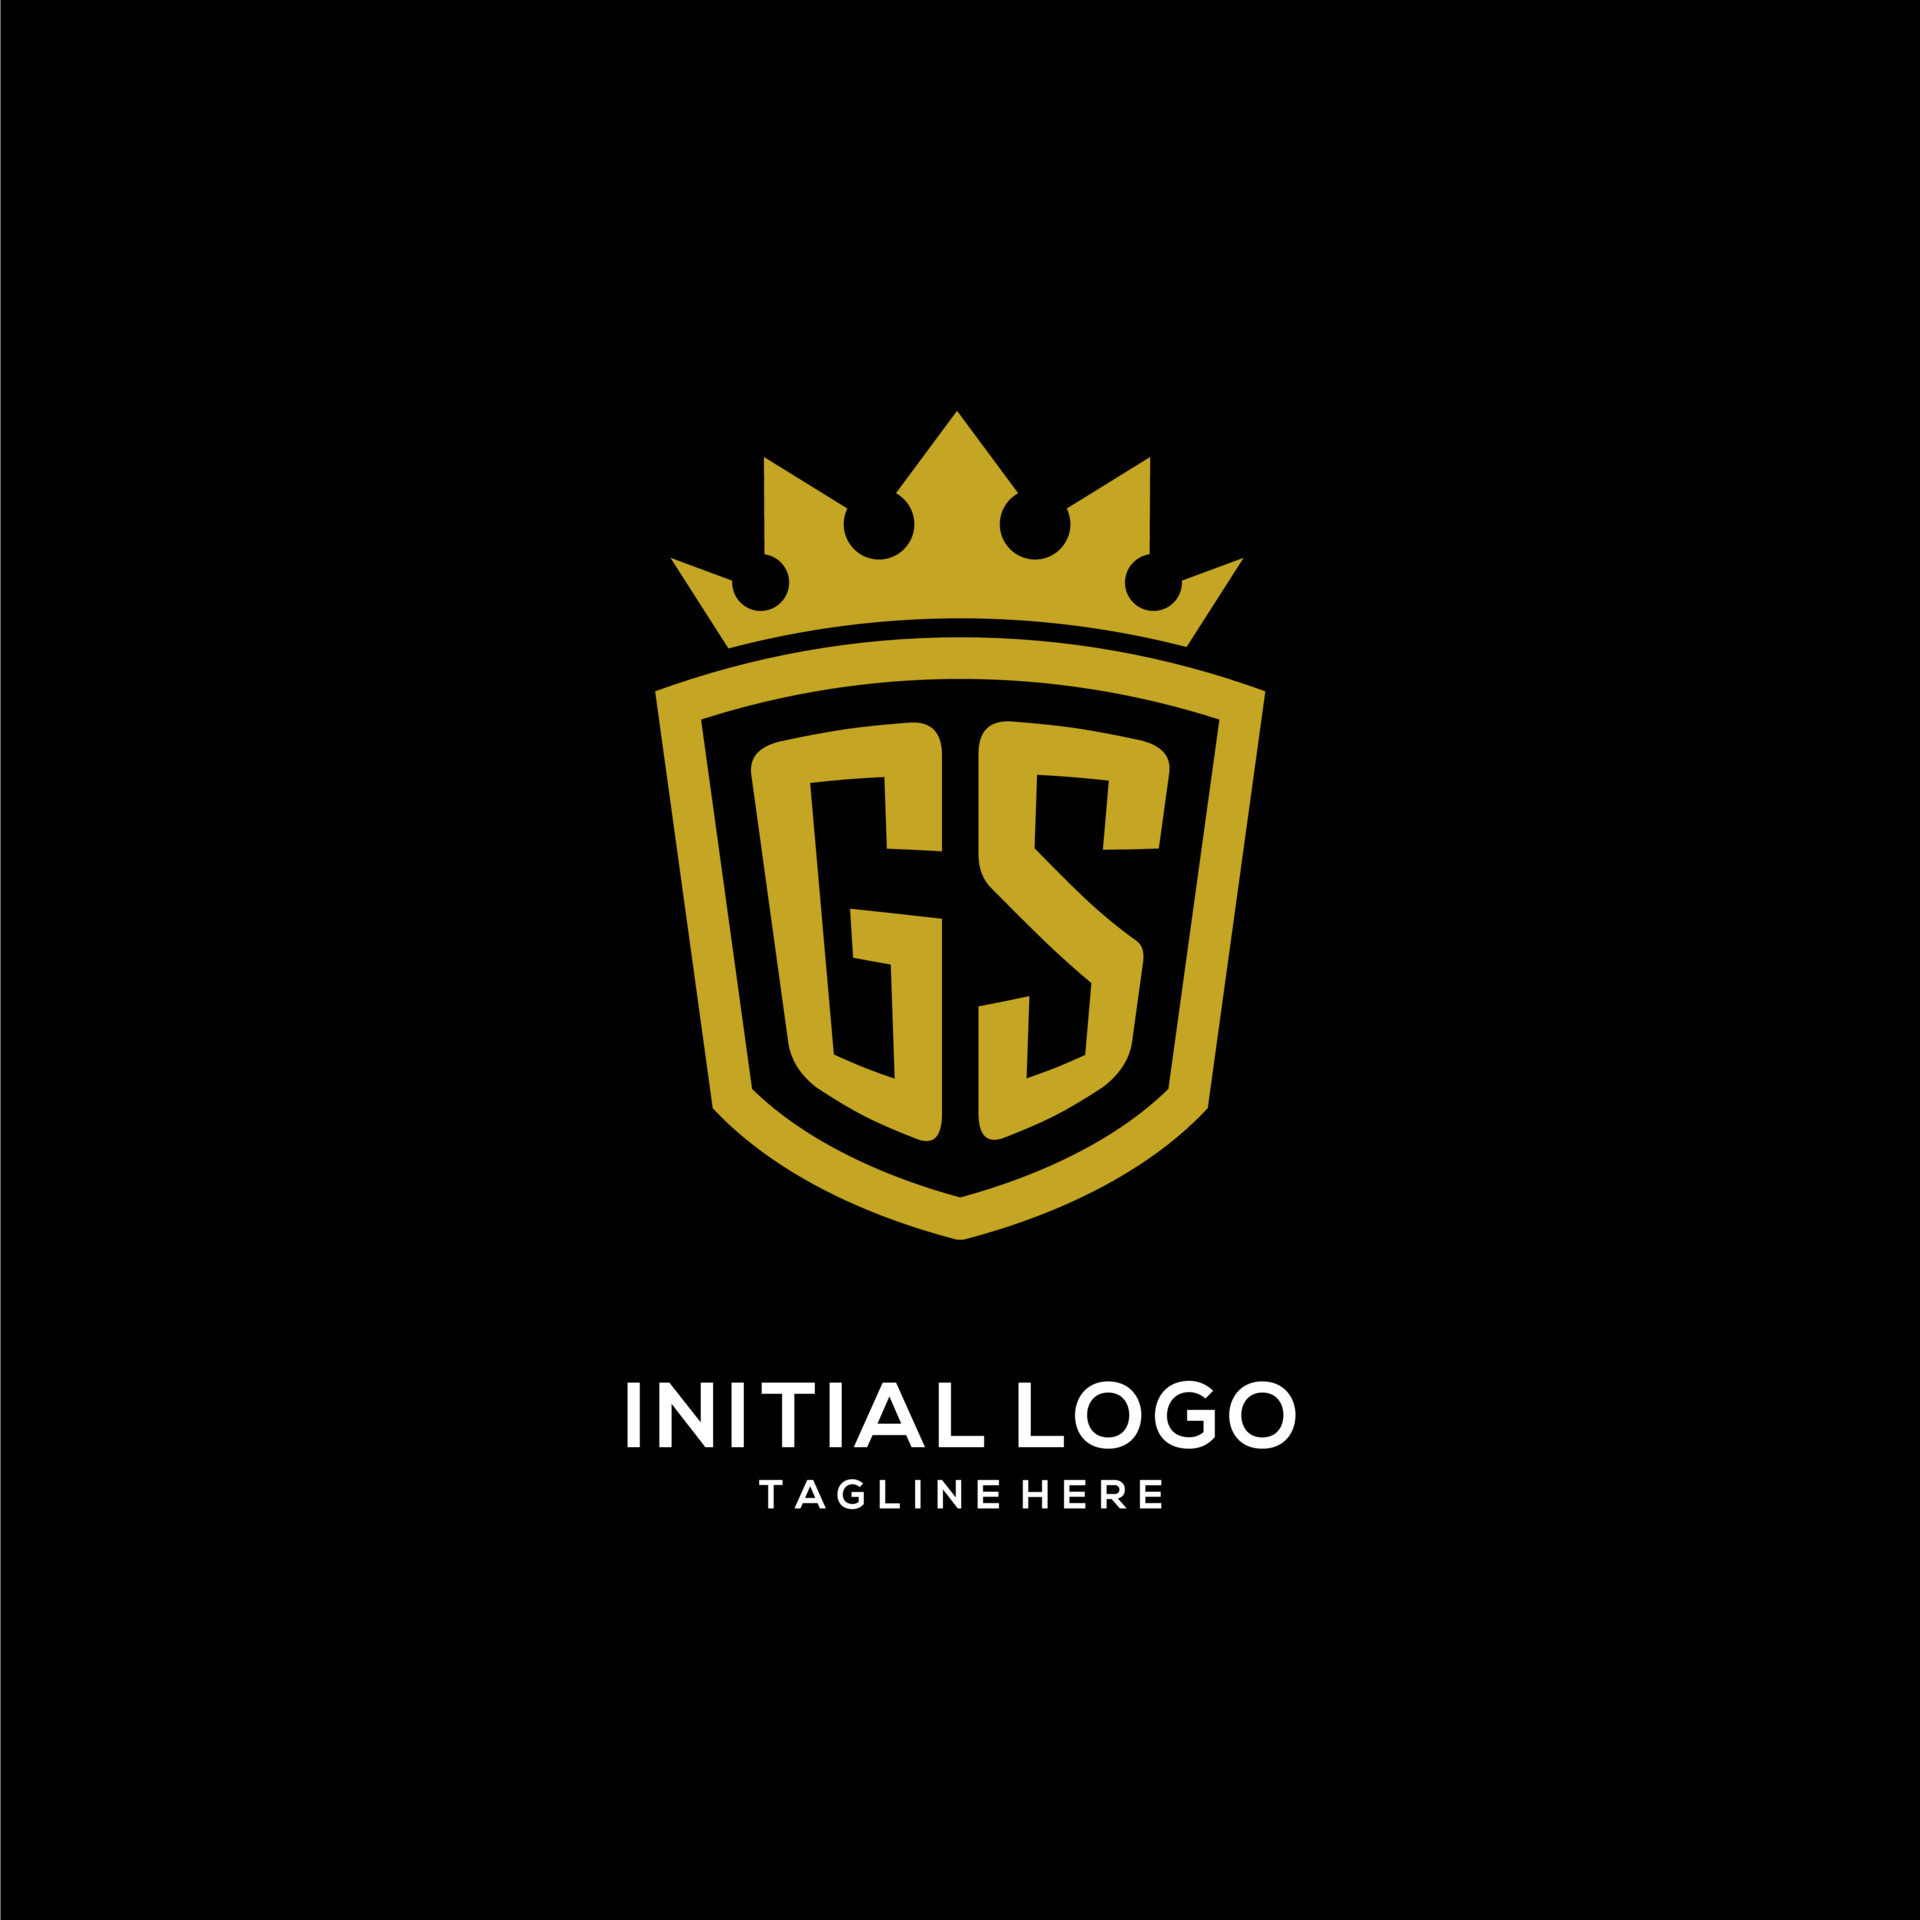 Gs initial letter in circle logo design. | CanStock